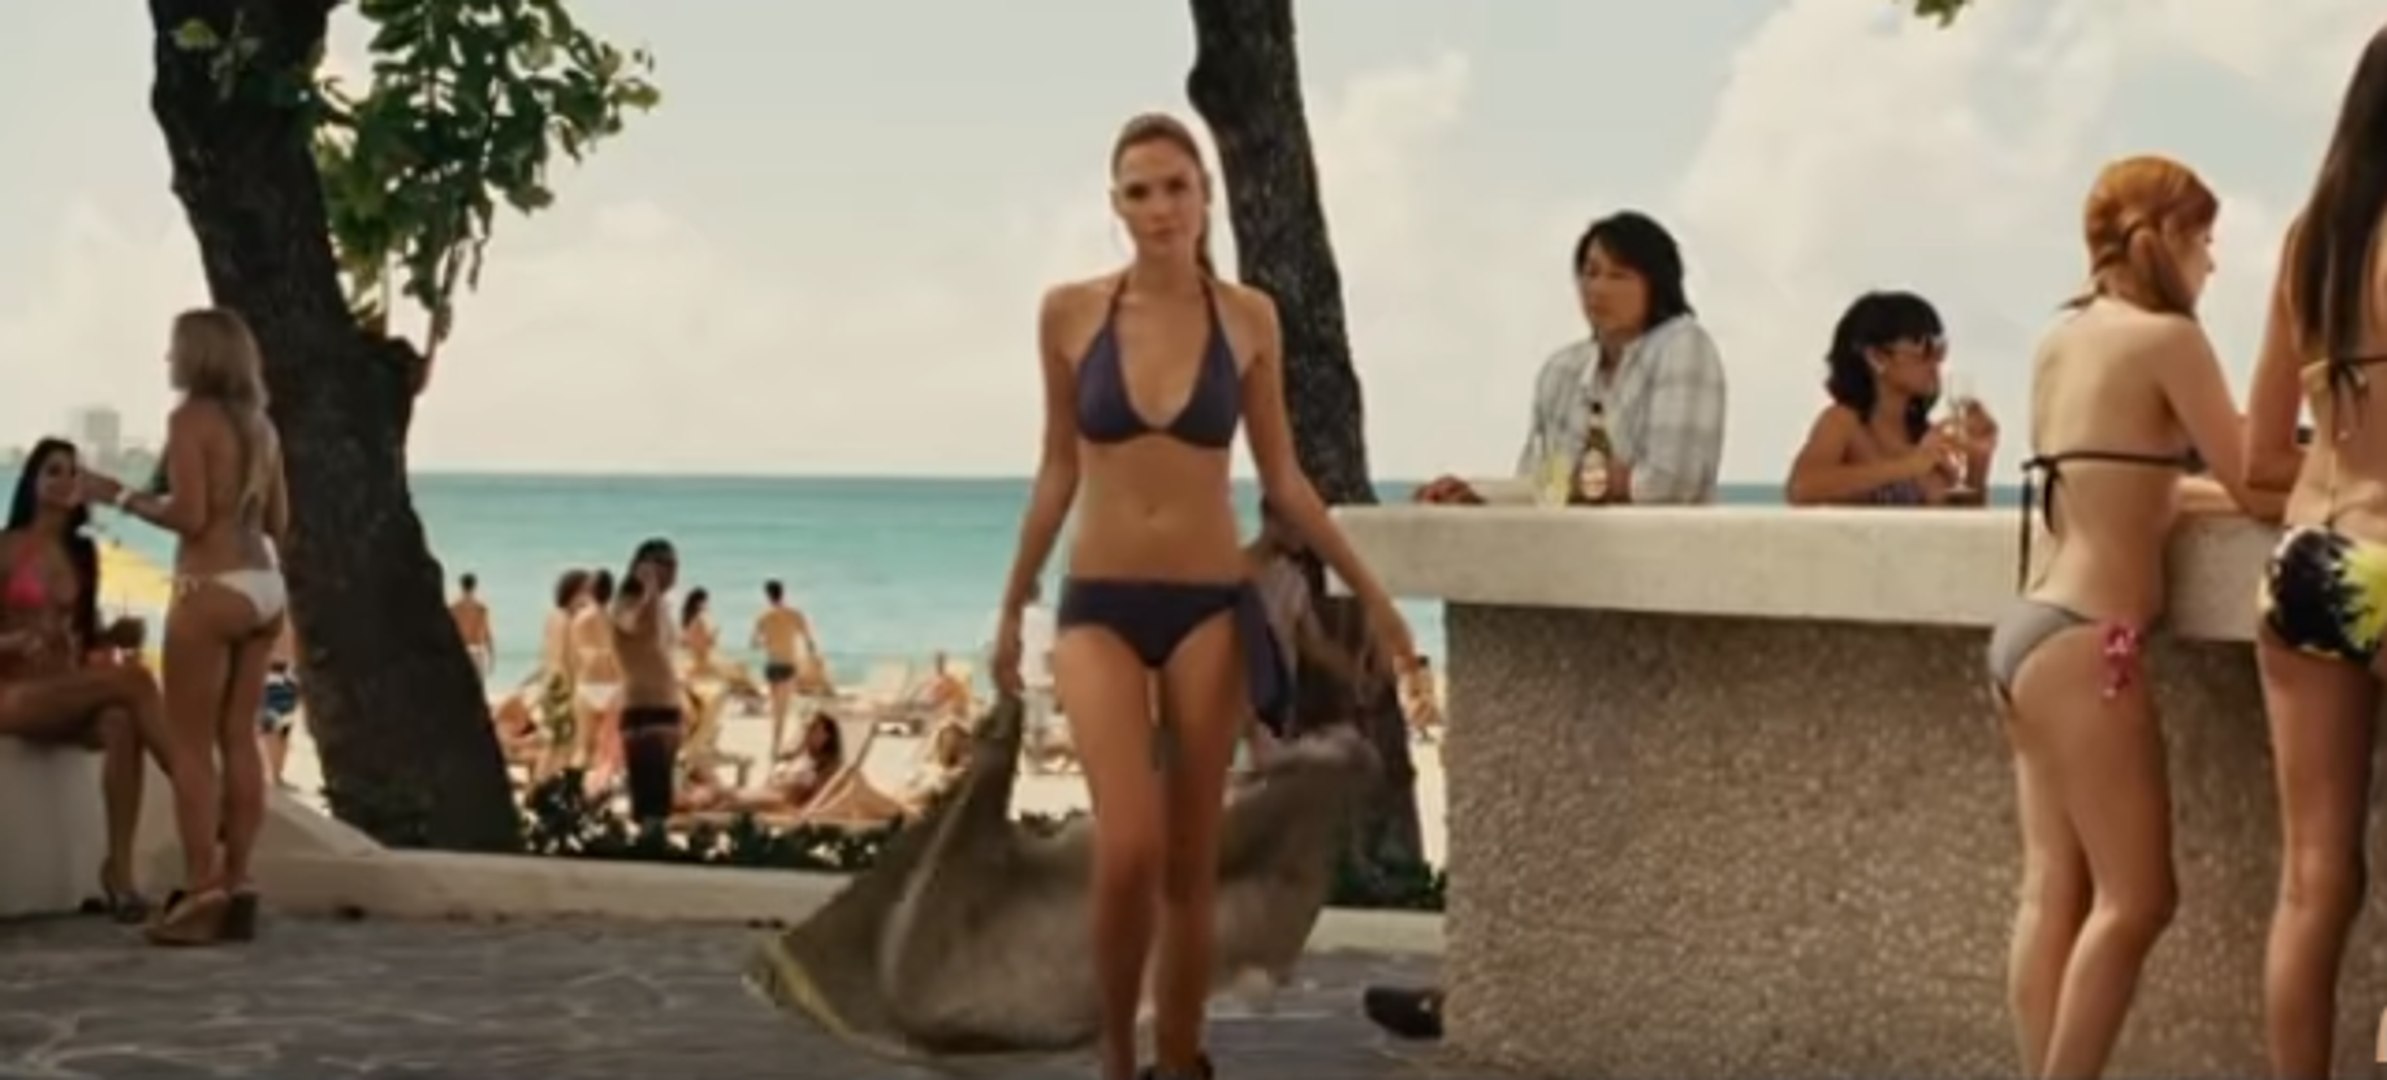 The Latest Fast Five Score Videos On Dailymotion See more bts moments when you get a digital copy of #ww84, out today! gal gadot fast five bikini scene